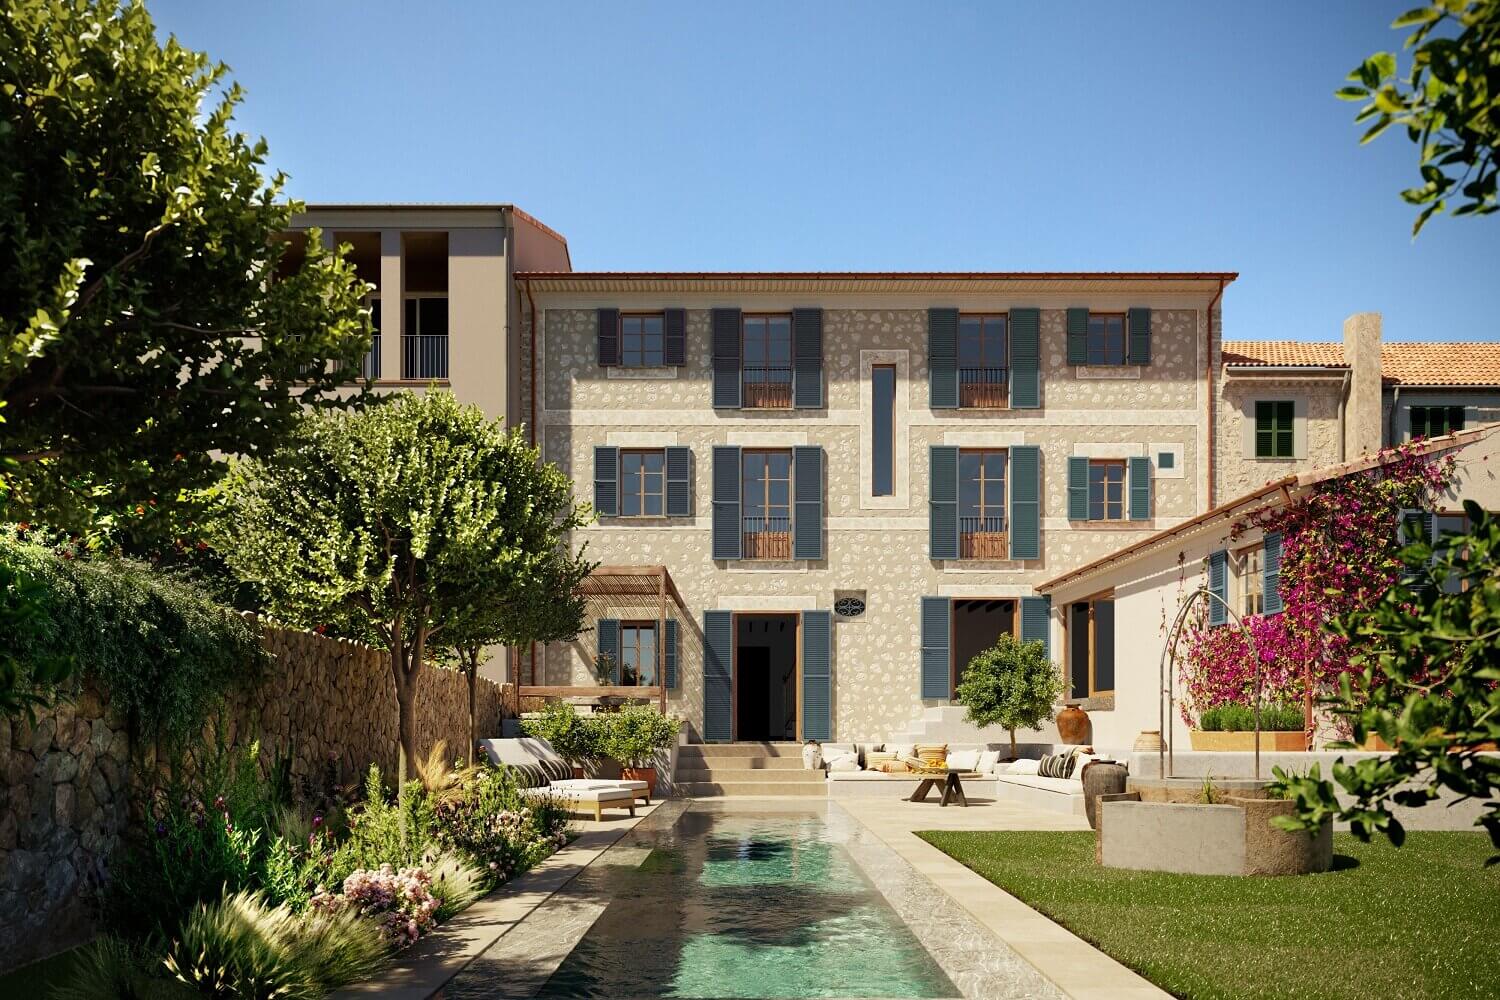 luxurious townhouse orchard mallorca nordroom A Luxurious Townhouse With An Orchard Garden on Mallorca